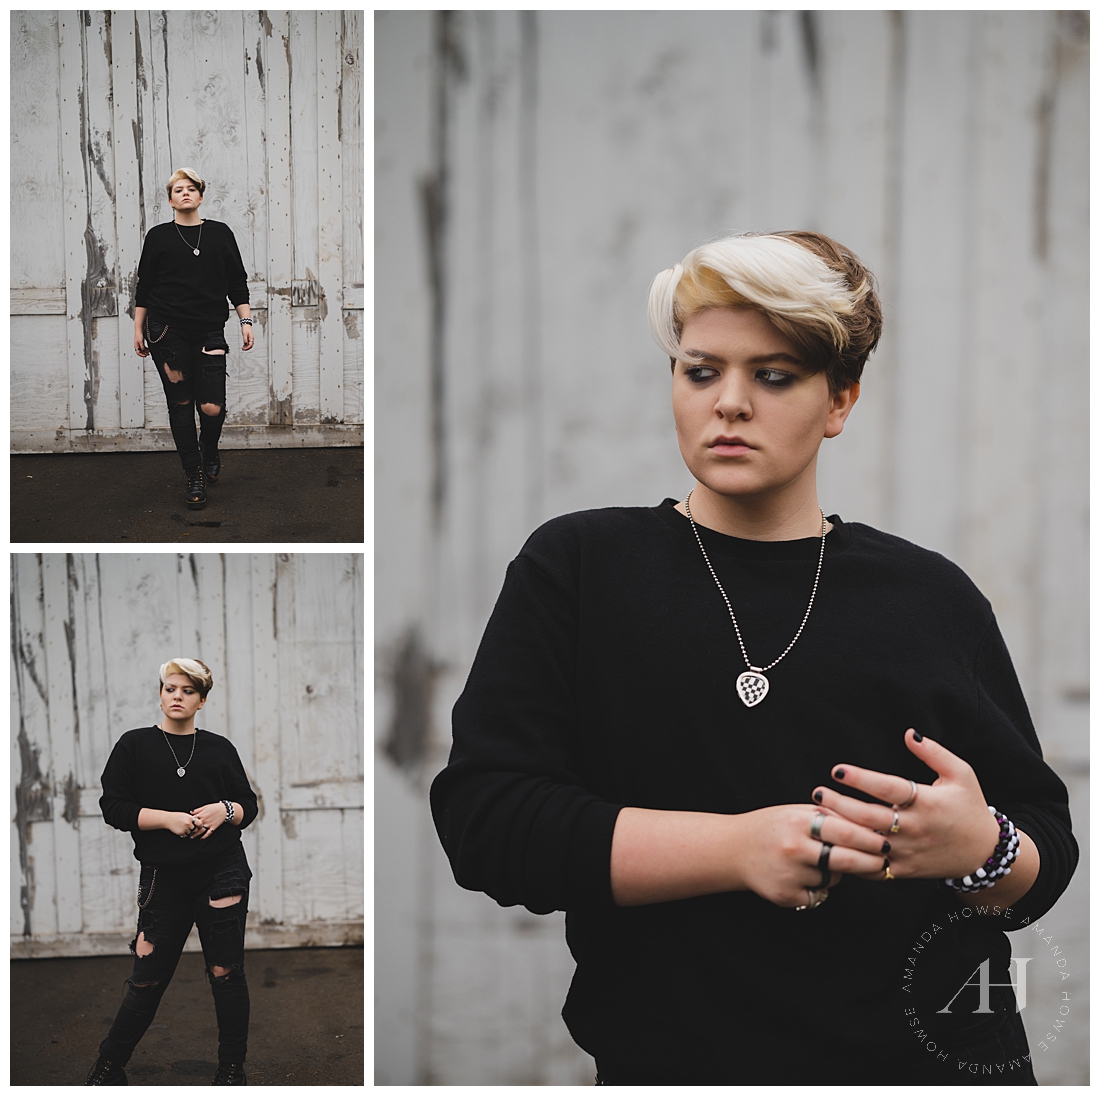 B&W Edgy Senior Portraits with Industrial Background | Photographed by the Best Tacoma, Washington Senior Photographer Amanda Howse Photography